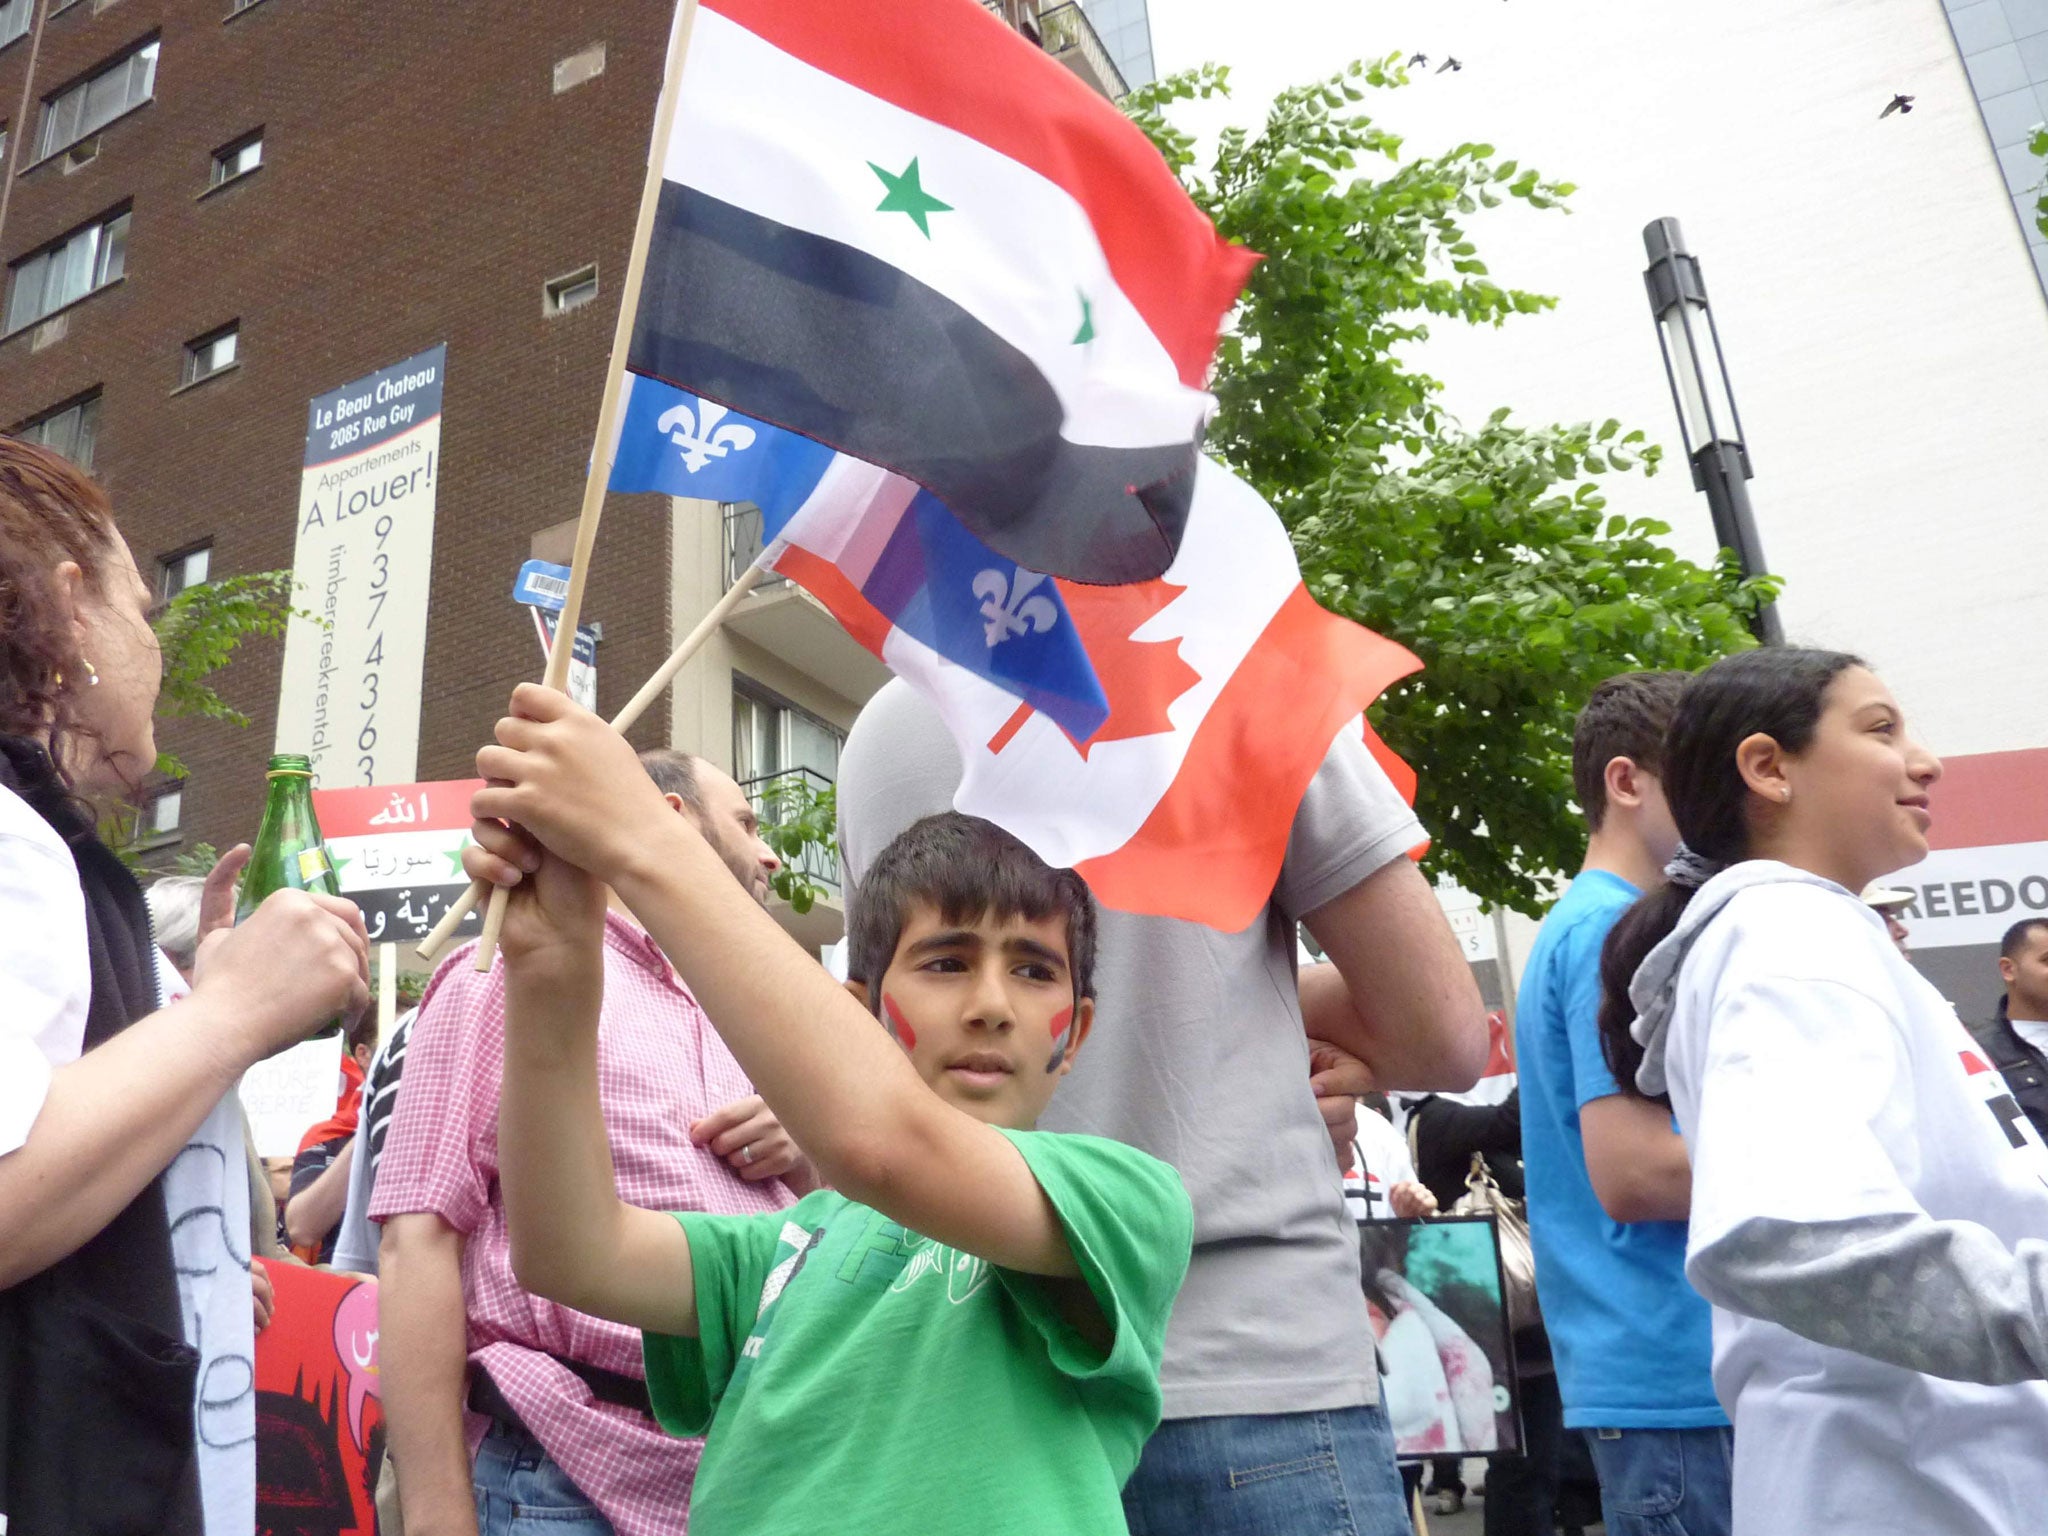 A young boy holds 3 flags, Syrian (with stars), Canadian (red) and Quebec (blue), in a demo against Syrian president Bashar al-Assad. Montreal, Quebec, Canada. June 11, 2011.